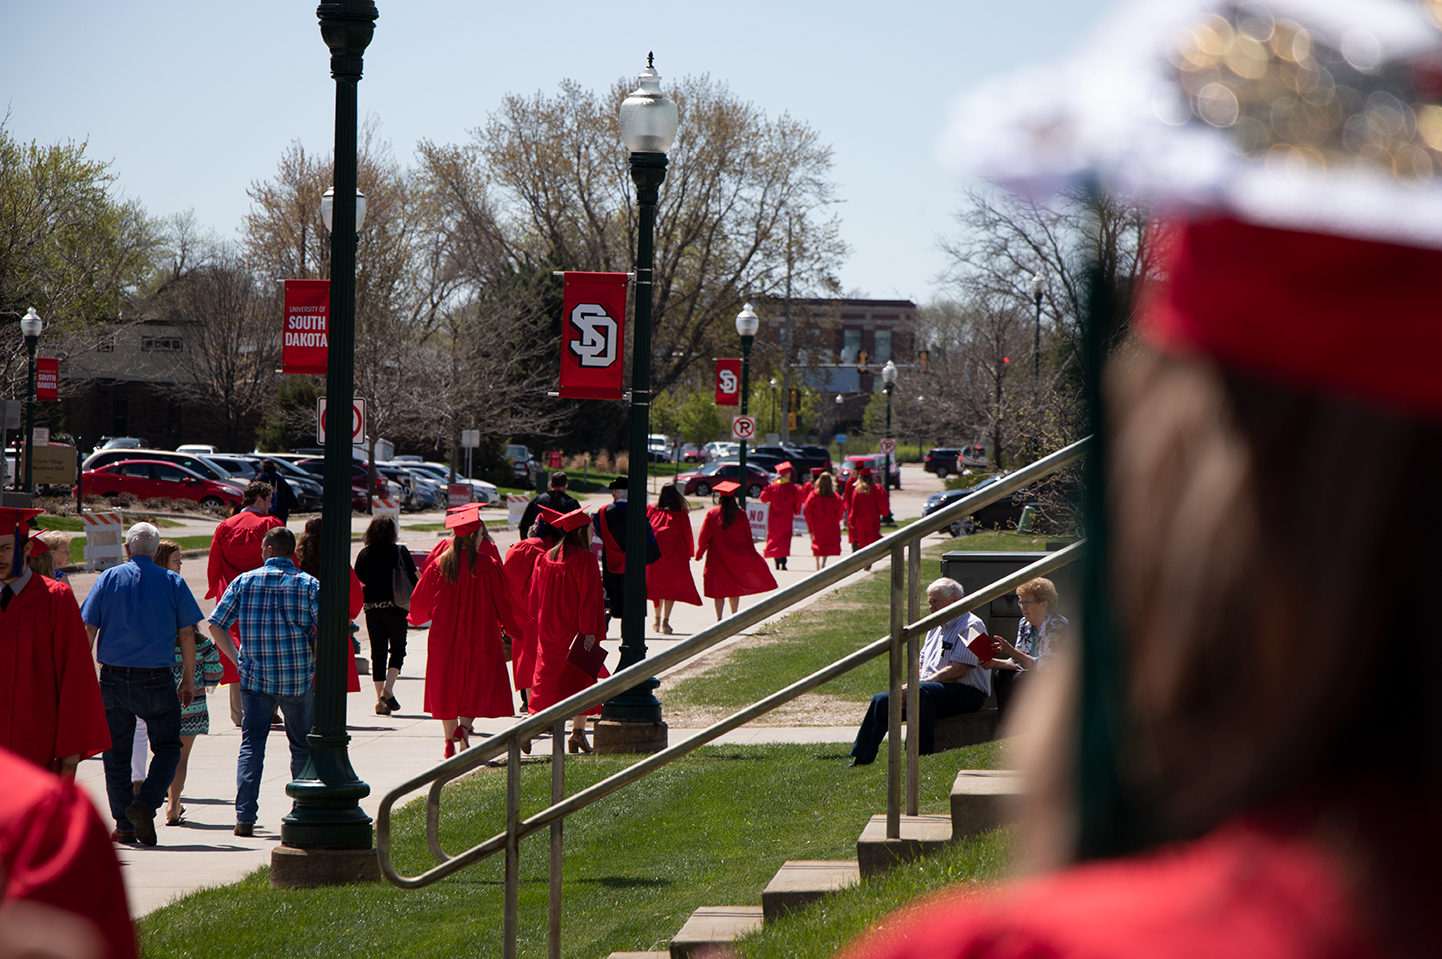 USD offers graduation resources for students